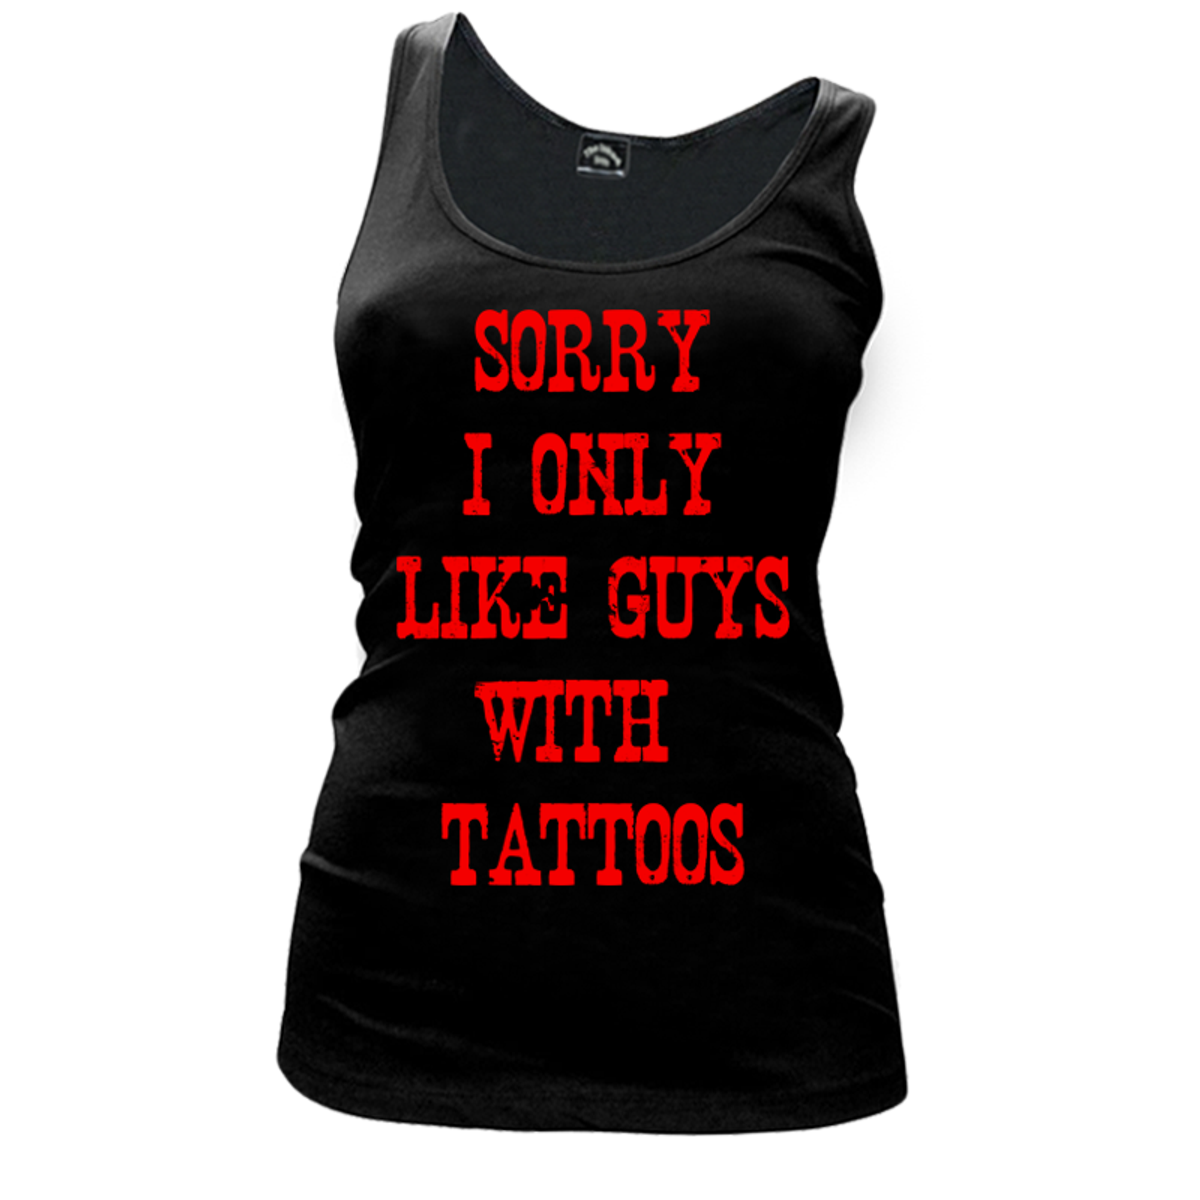 Sorry I Only Like Boys With Tattoos Men Women Unisex T Shirt Tank Top Vest 996 